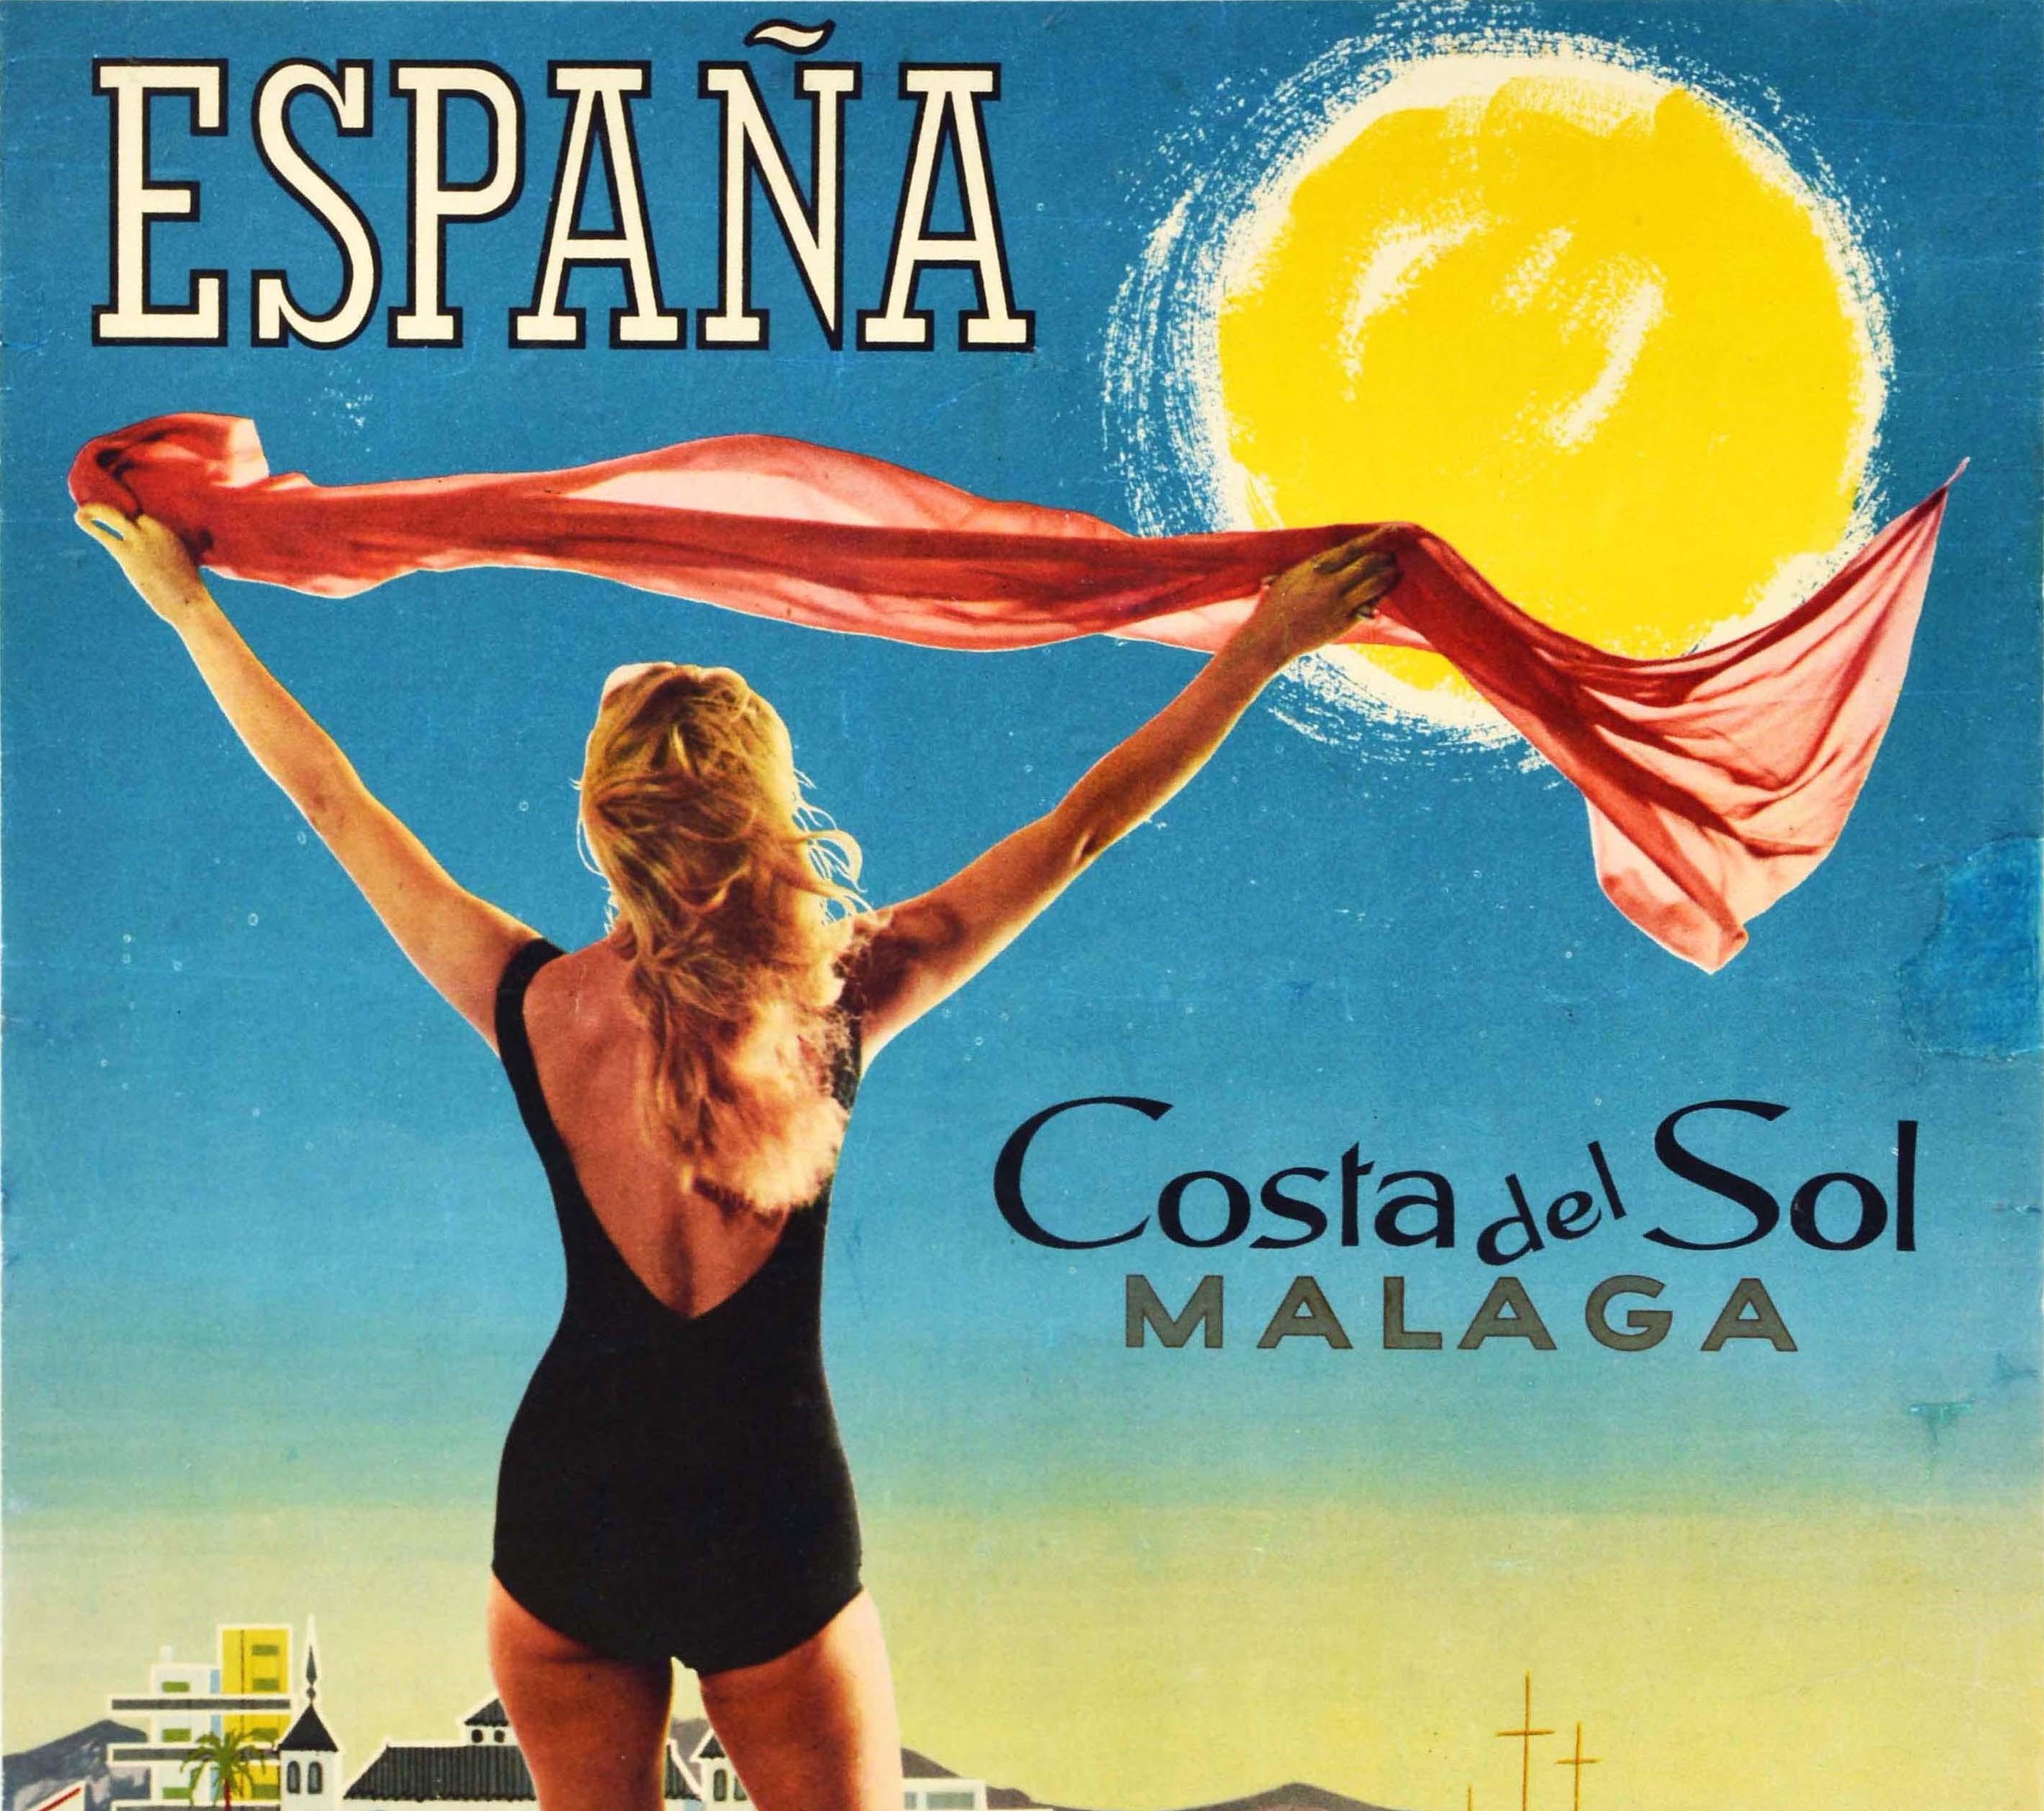 Original vintage Spanish travel poster advertising Malaga Costa del Sol Espana by Iberia Lineas Aereas de Espana / Air Lines of Spain featuring a colourful image of a lady wearing a swimsuit and holding up a scarf billowing in the wind in the